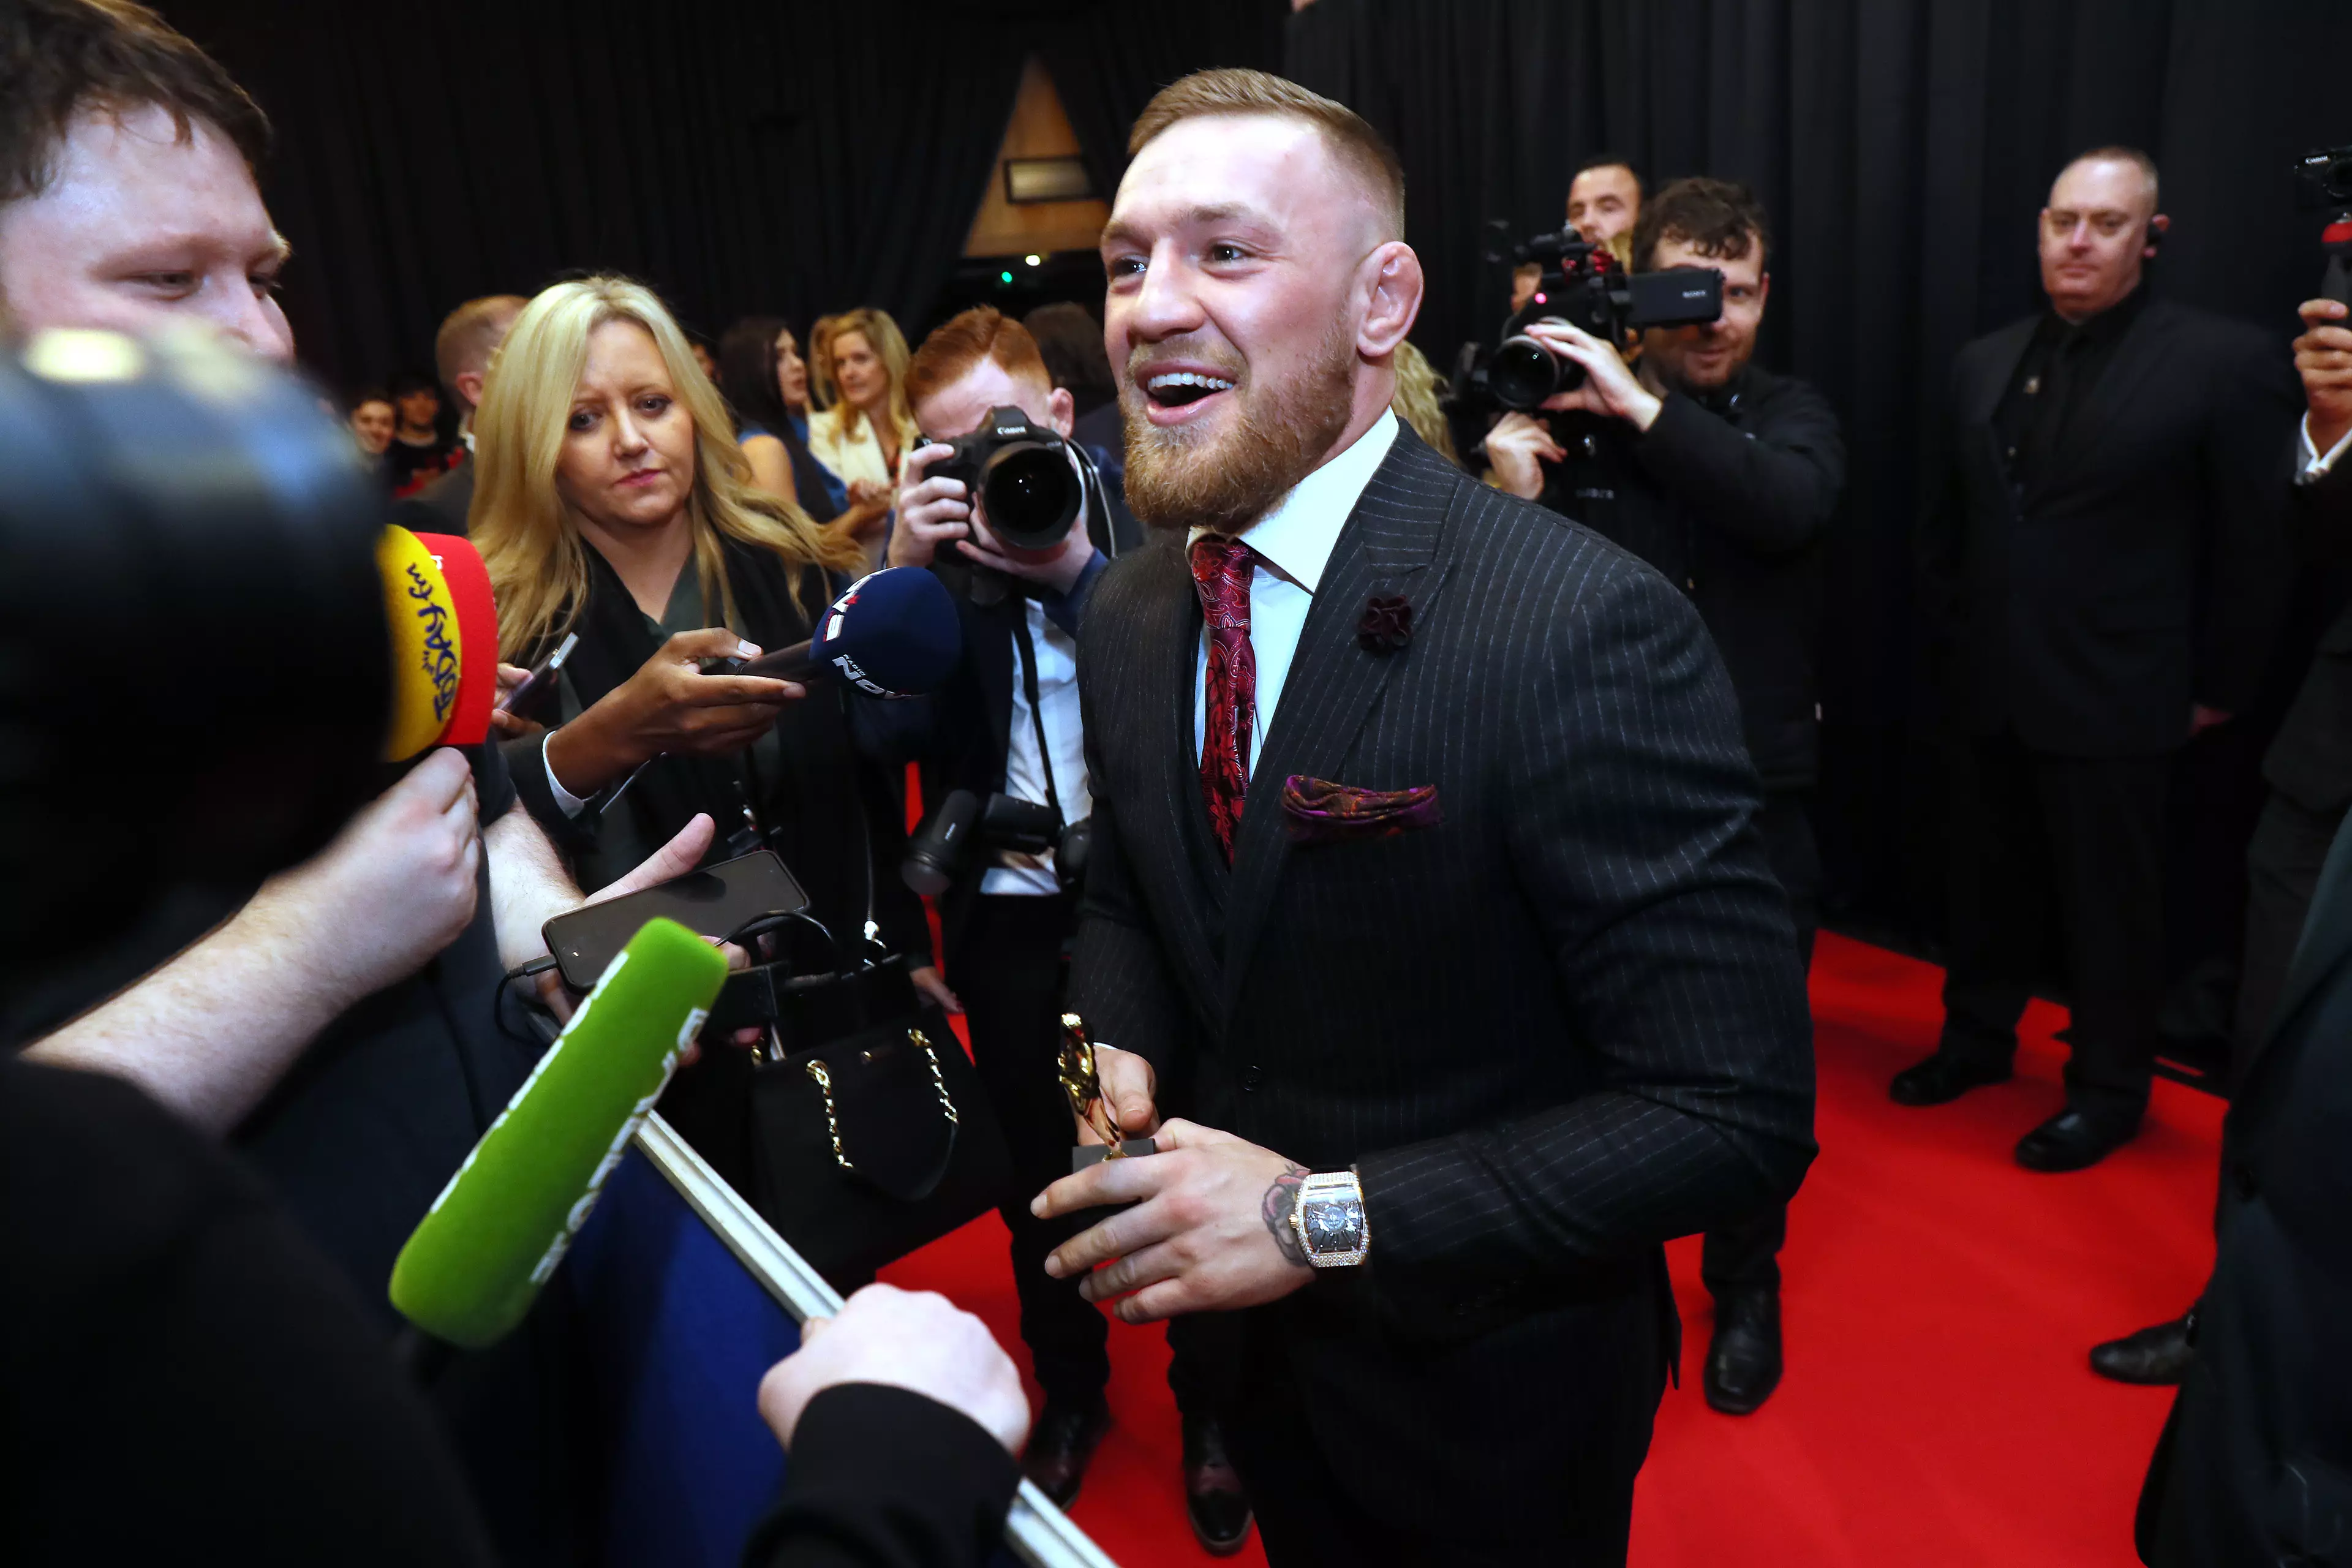 McGregor has confirmed his return for 18 January 2020.